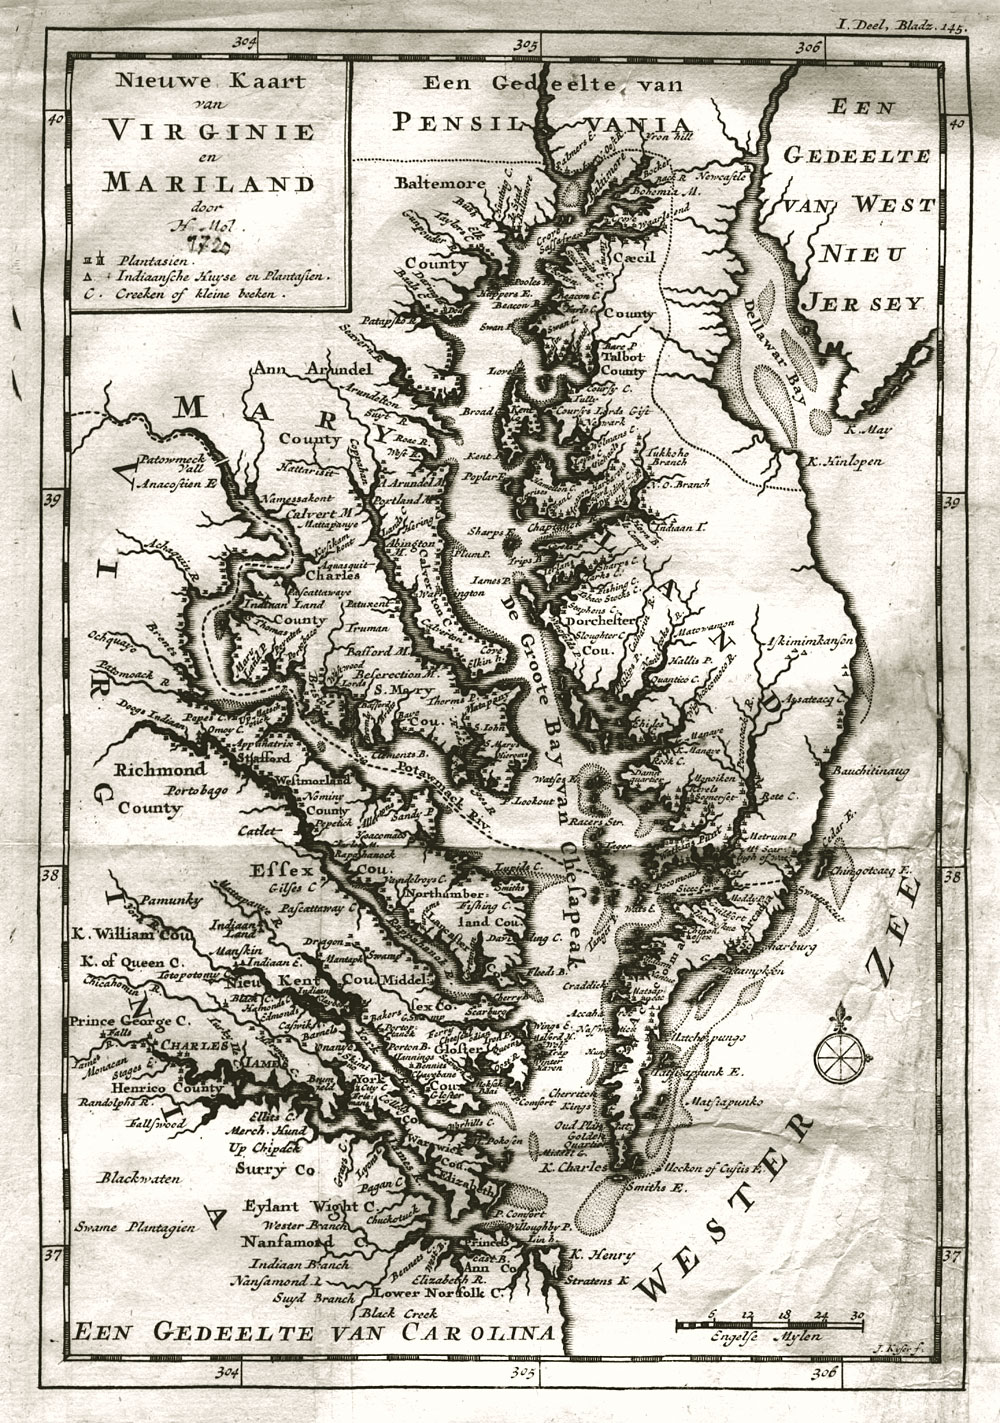 Herman Moll's map of Virginia and Maryland, 1720